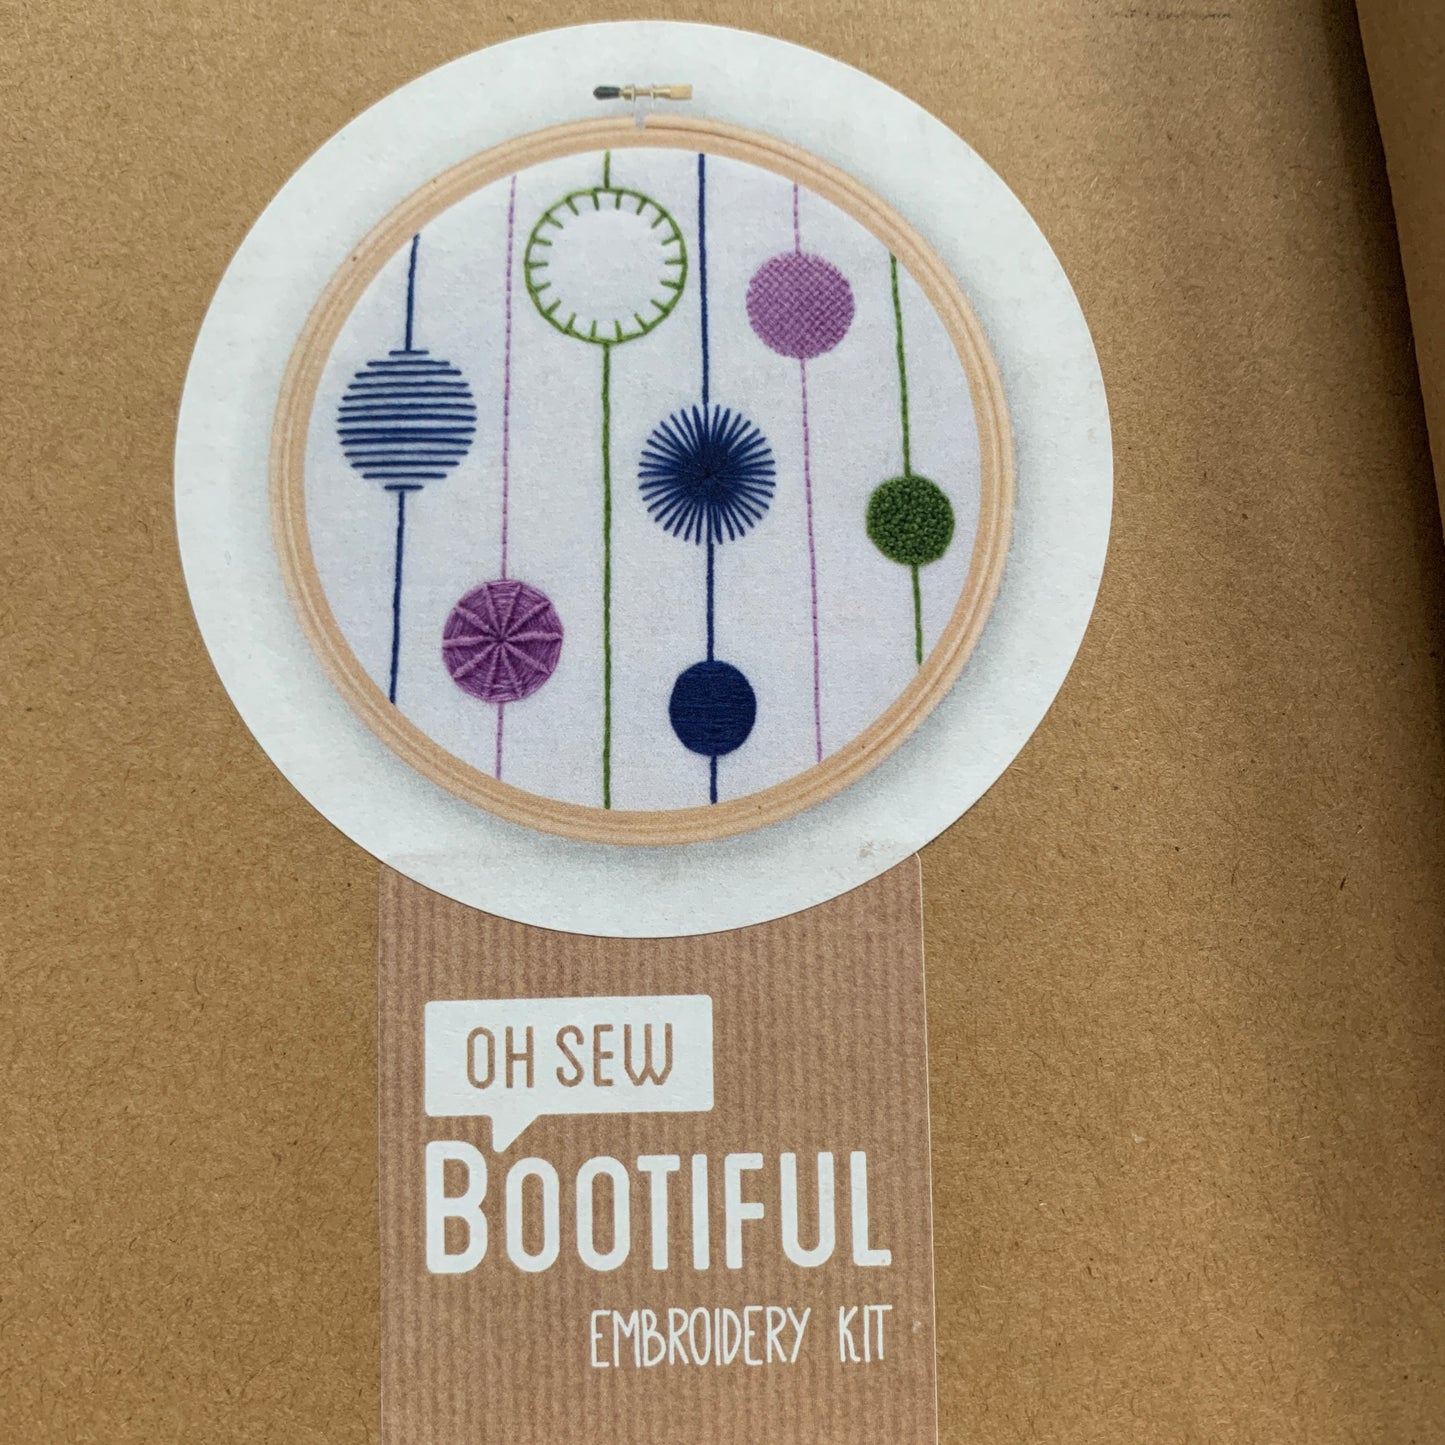 Embroidery Kits by Oh Sew Bootiful